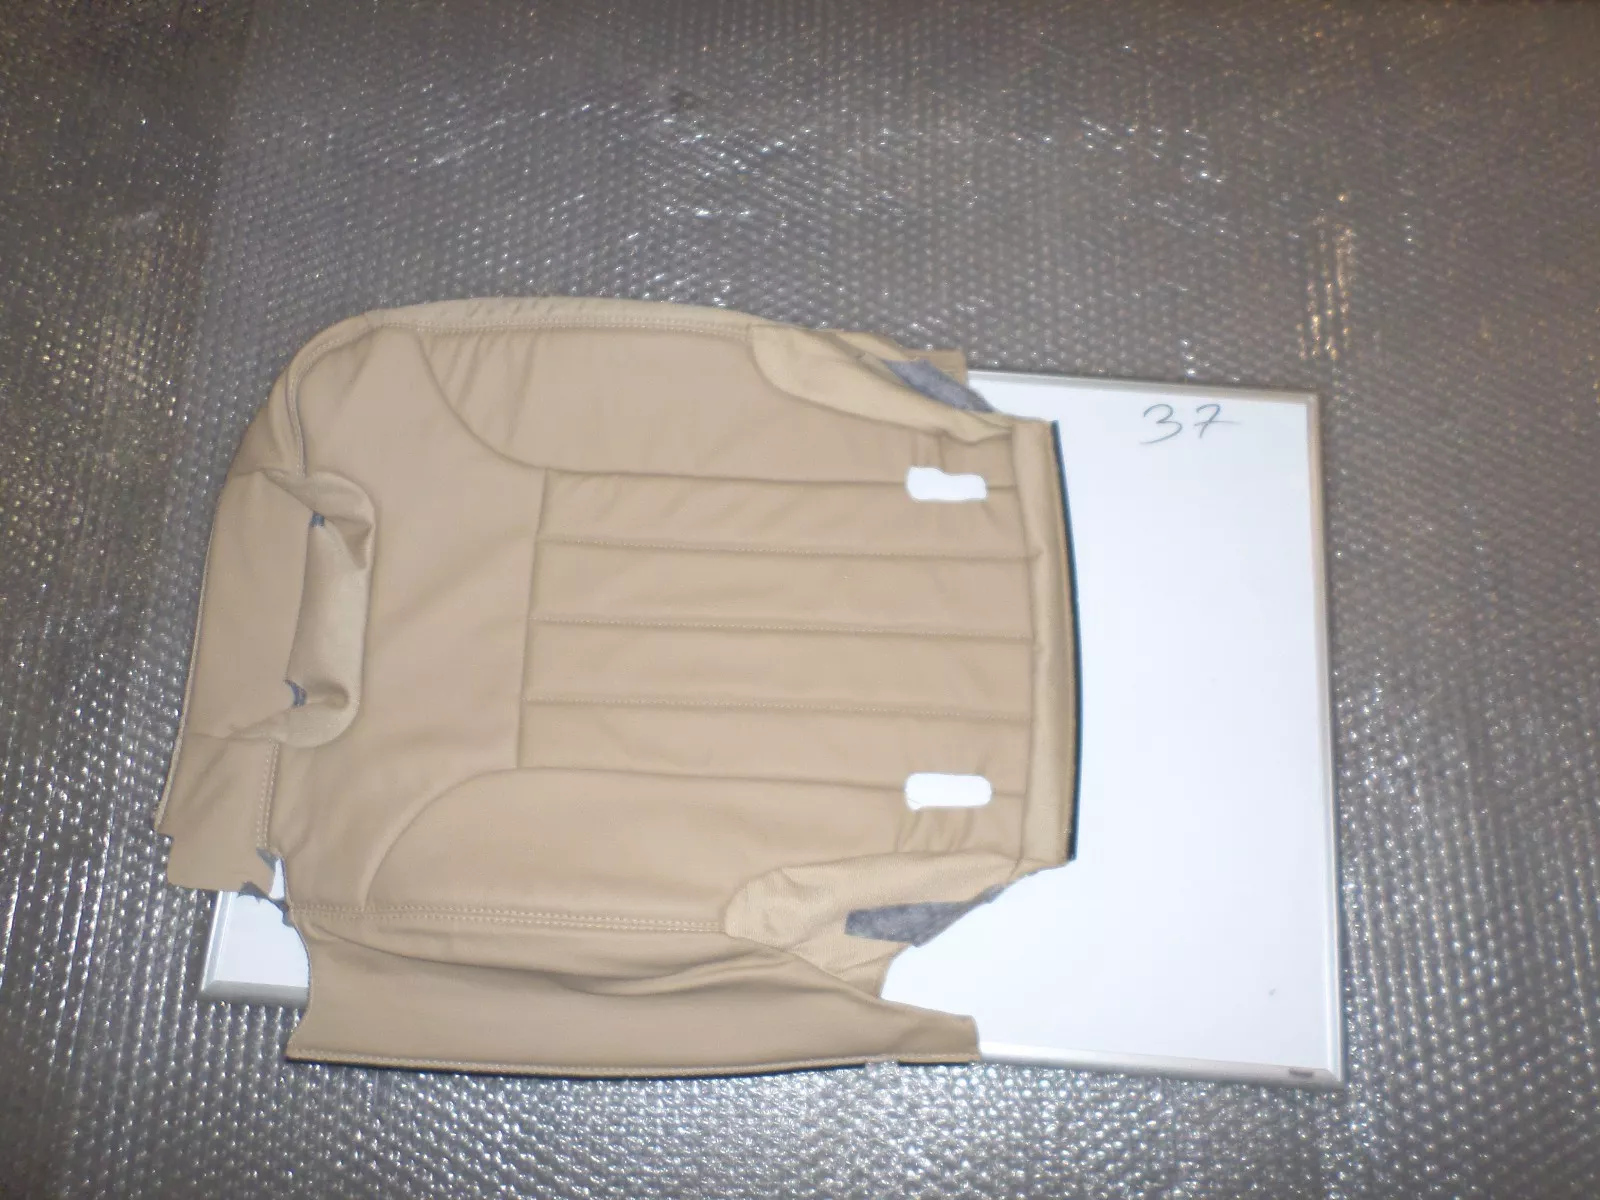 New OEM Mercedes 3rd Row LH Seat Cover 2006-2013 R-Class 251-930-08-87-8K55 - £77.85 GBP